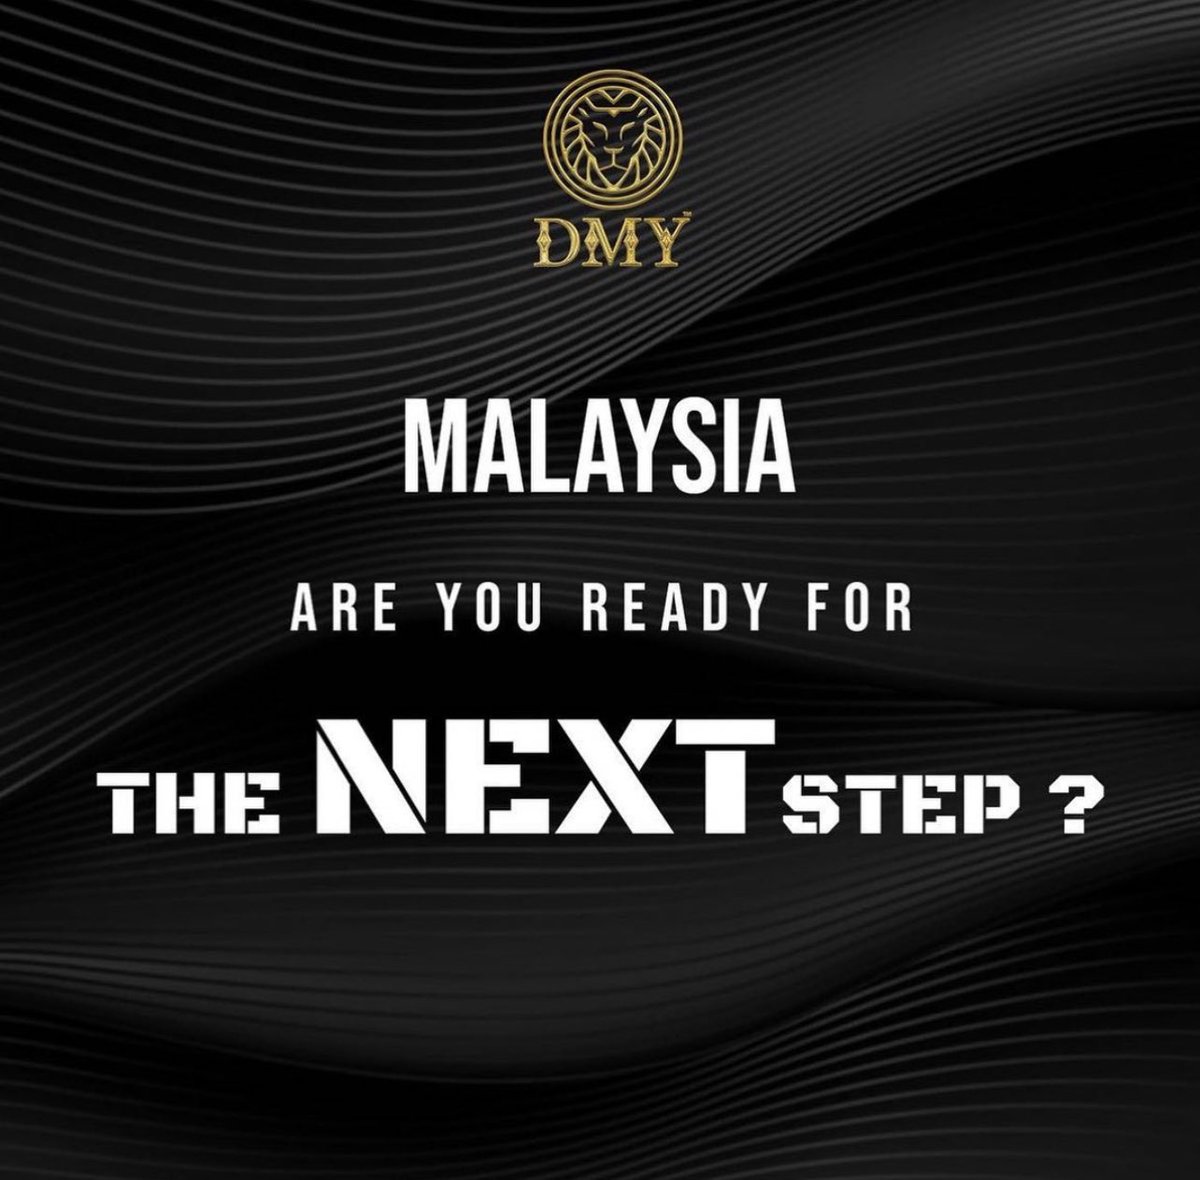 MALAYSIA🇲🇾 ARE YOU READY FOR THE NEXT STEP? 

GUESSING GAME IS ON!!!!!!

@dmycreation